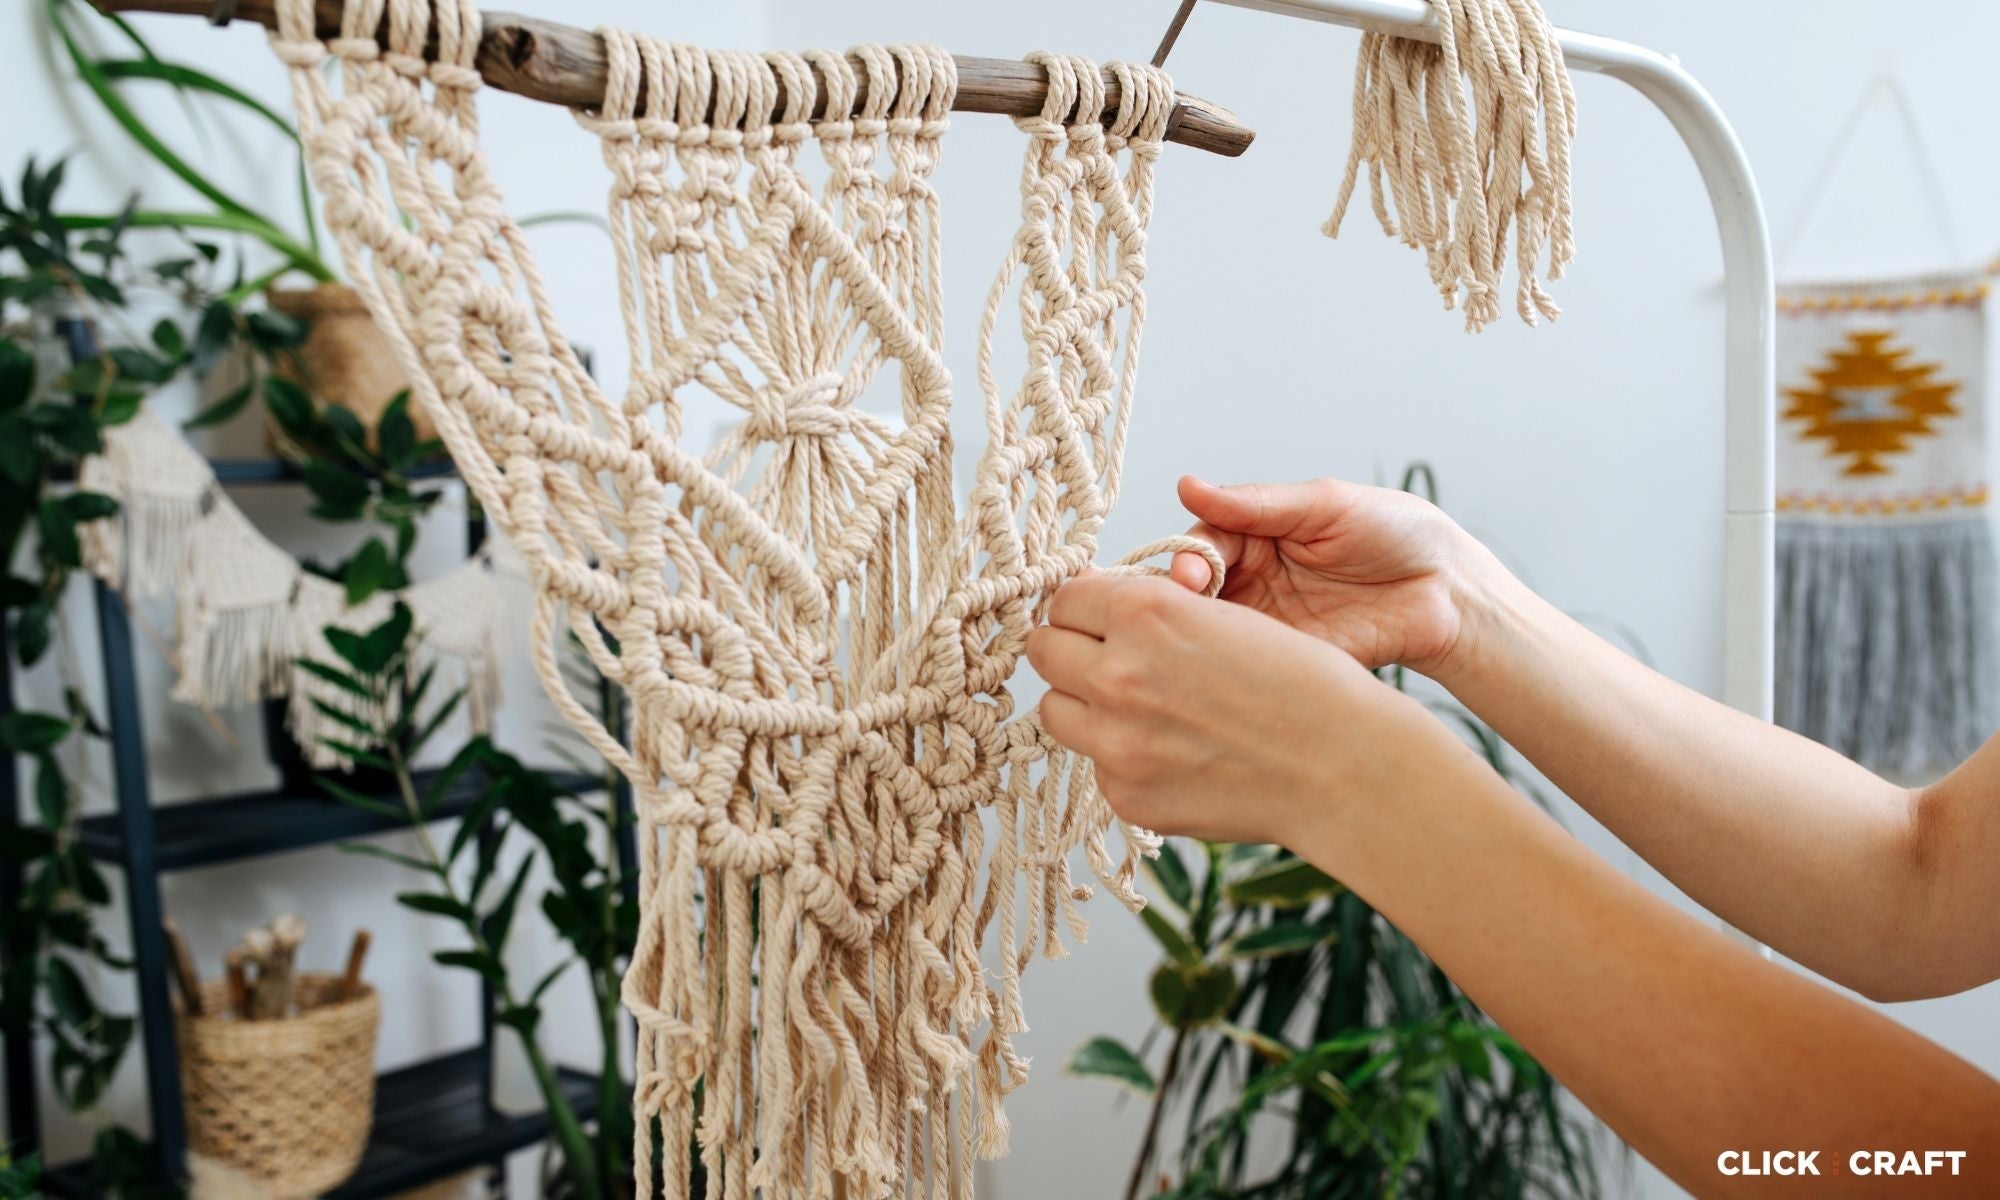 How To Get Started With Macrame?